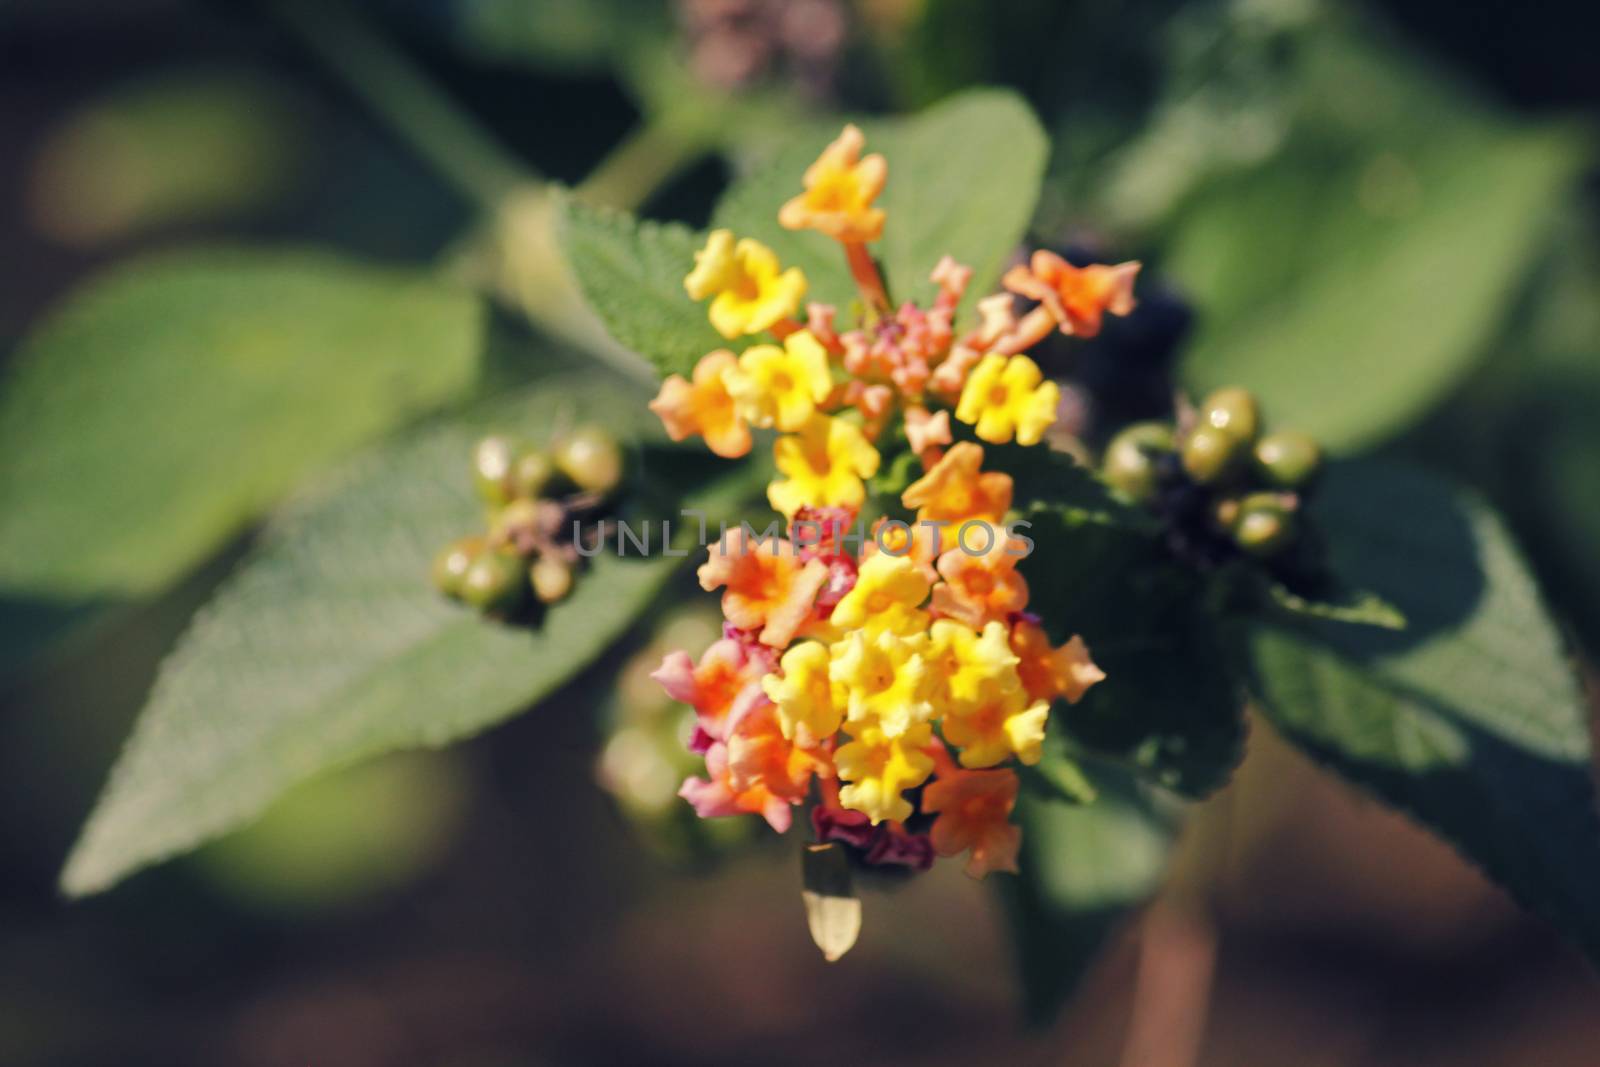 Lantana camara, also known as big sage, wild sage, red sage, white sage and tickberry is a species of flowering plant within the verbena family, Verbenaceae